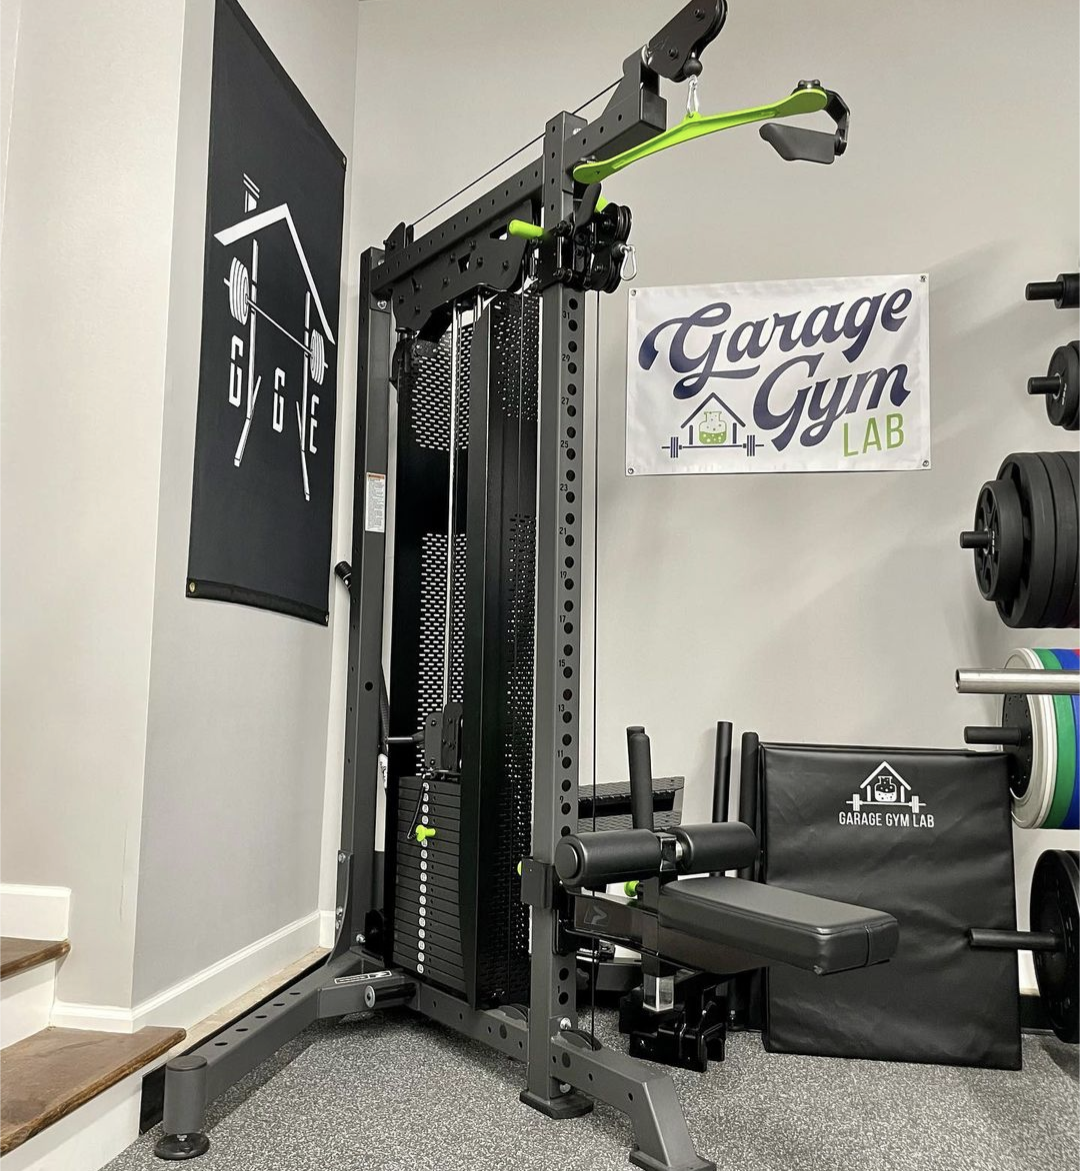 Preacher Pad Invention, Predicting the Future, and More with Garage Gym Lab  - Garage Gym Experiment